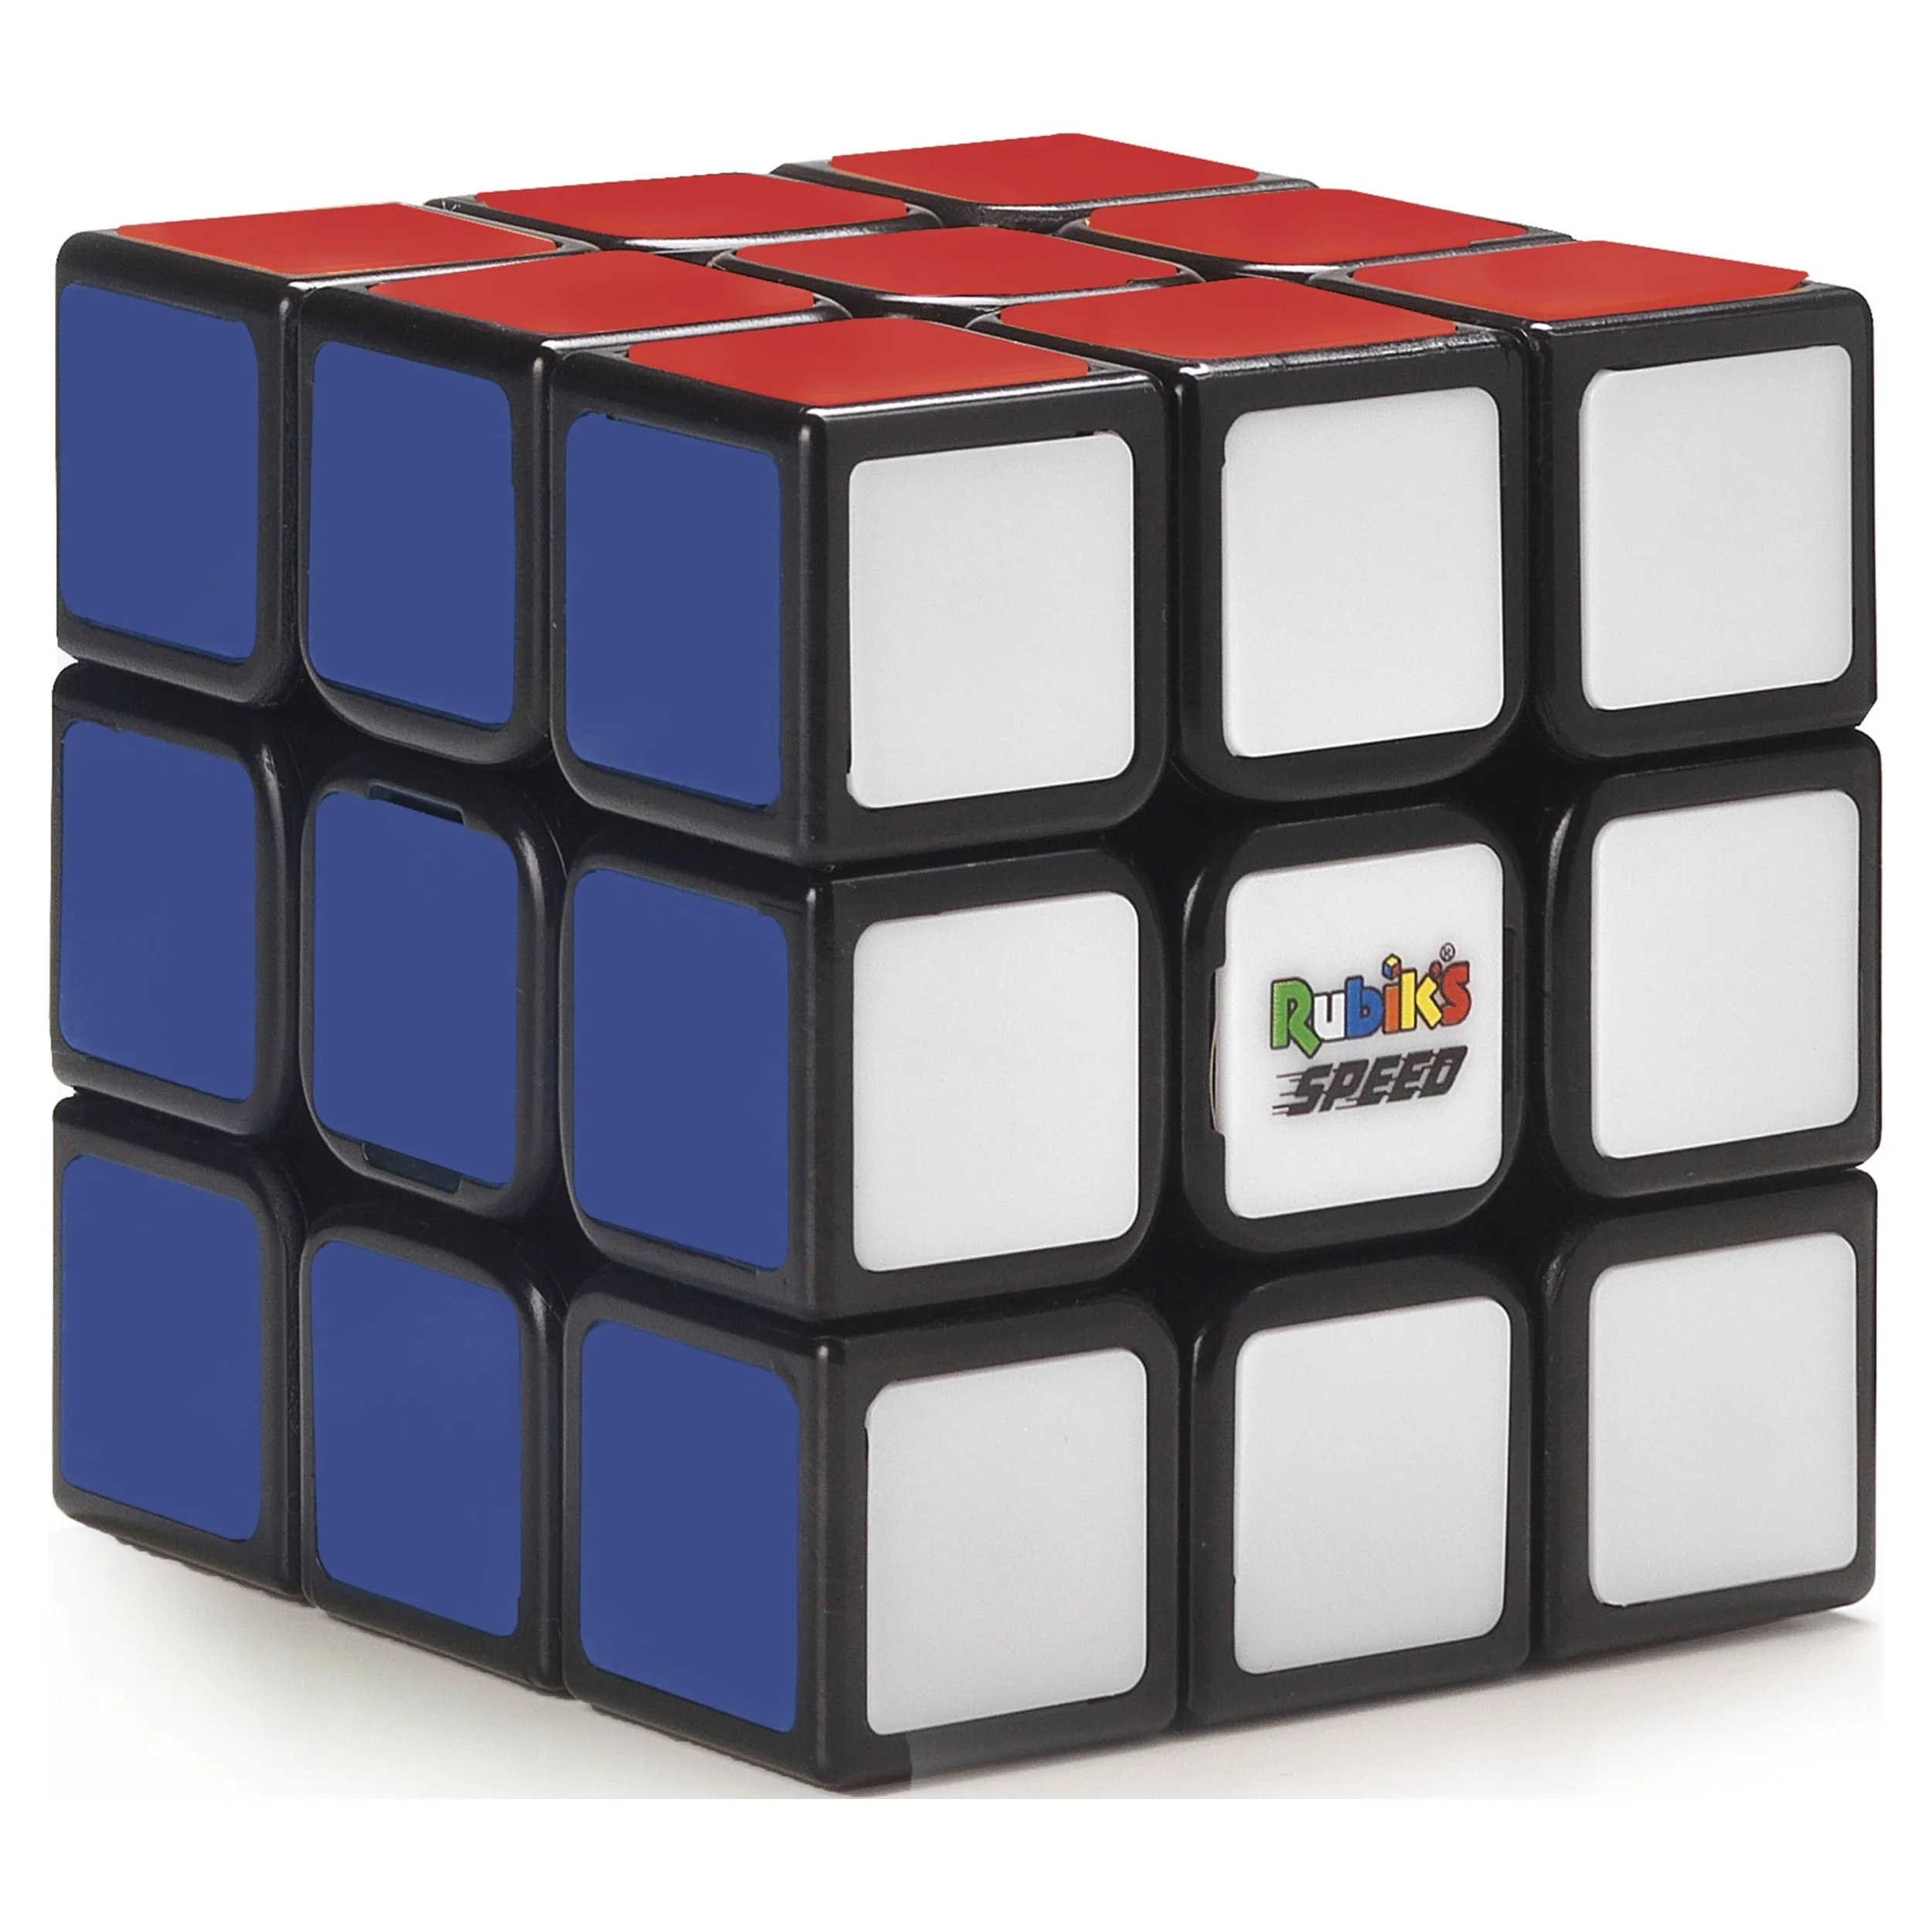 Rubik’s Cube, 3x3 Magnetic Speed Cube, Super Fast Problem-Solving Challenging Retro Fidget Toy Travel Brain Teaser, for Adults & Kids Ages 8 and up